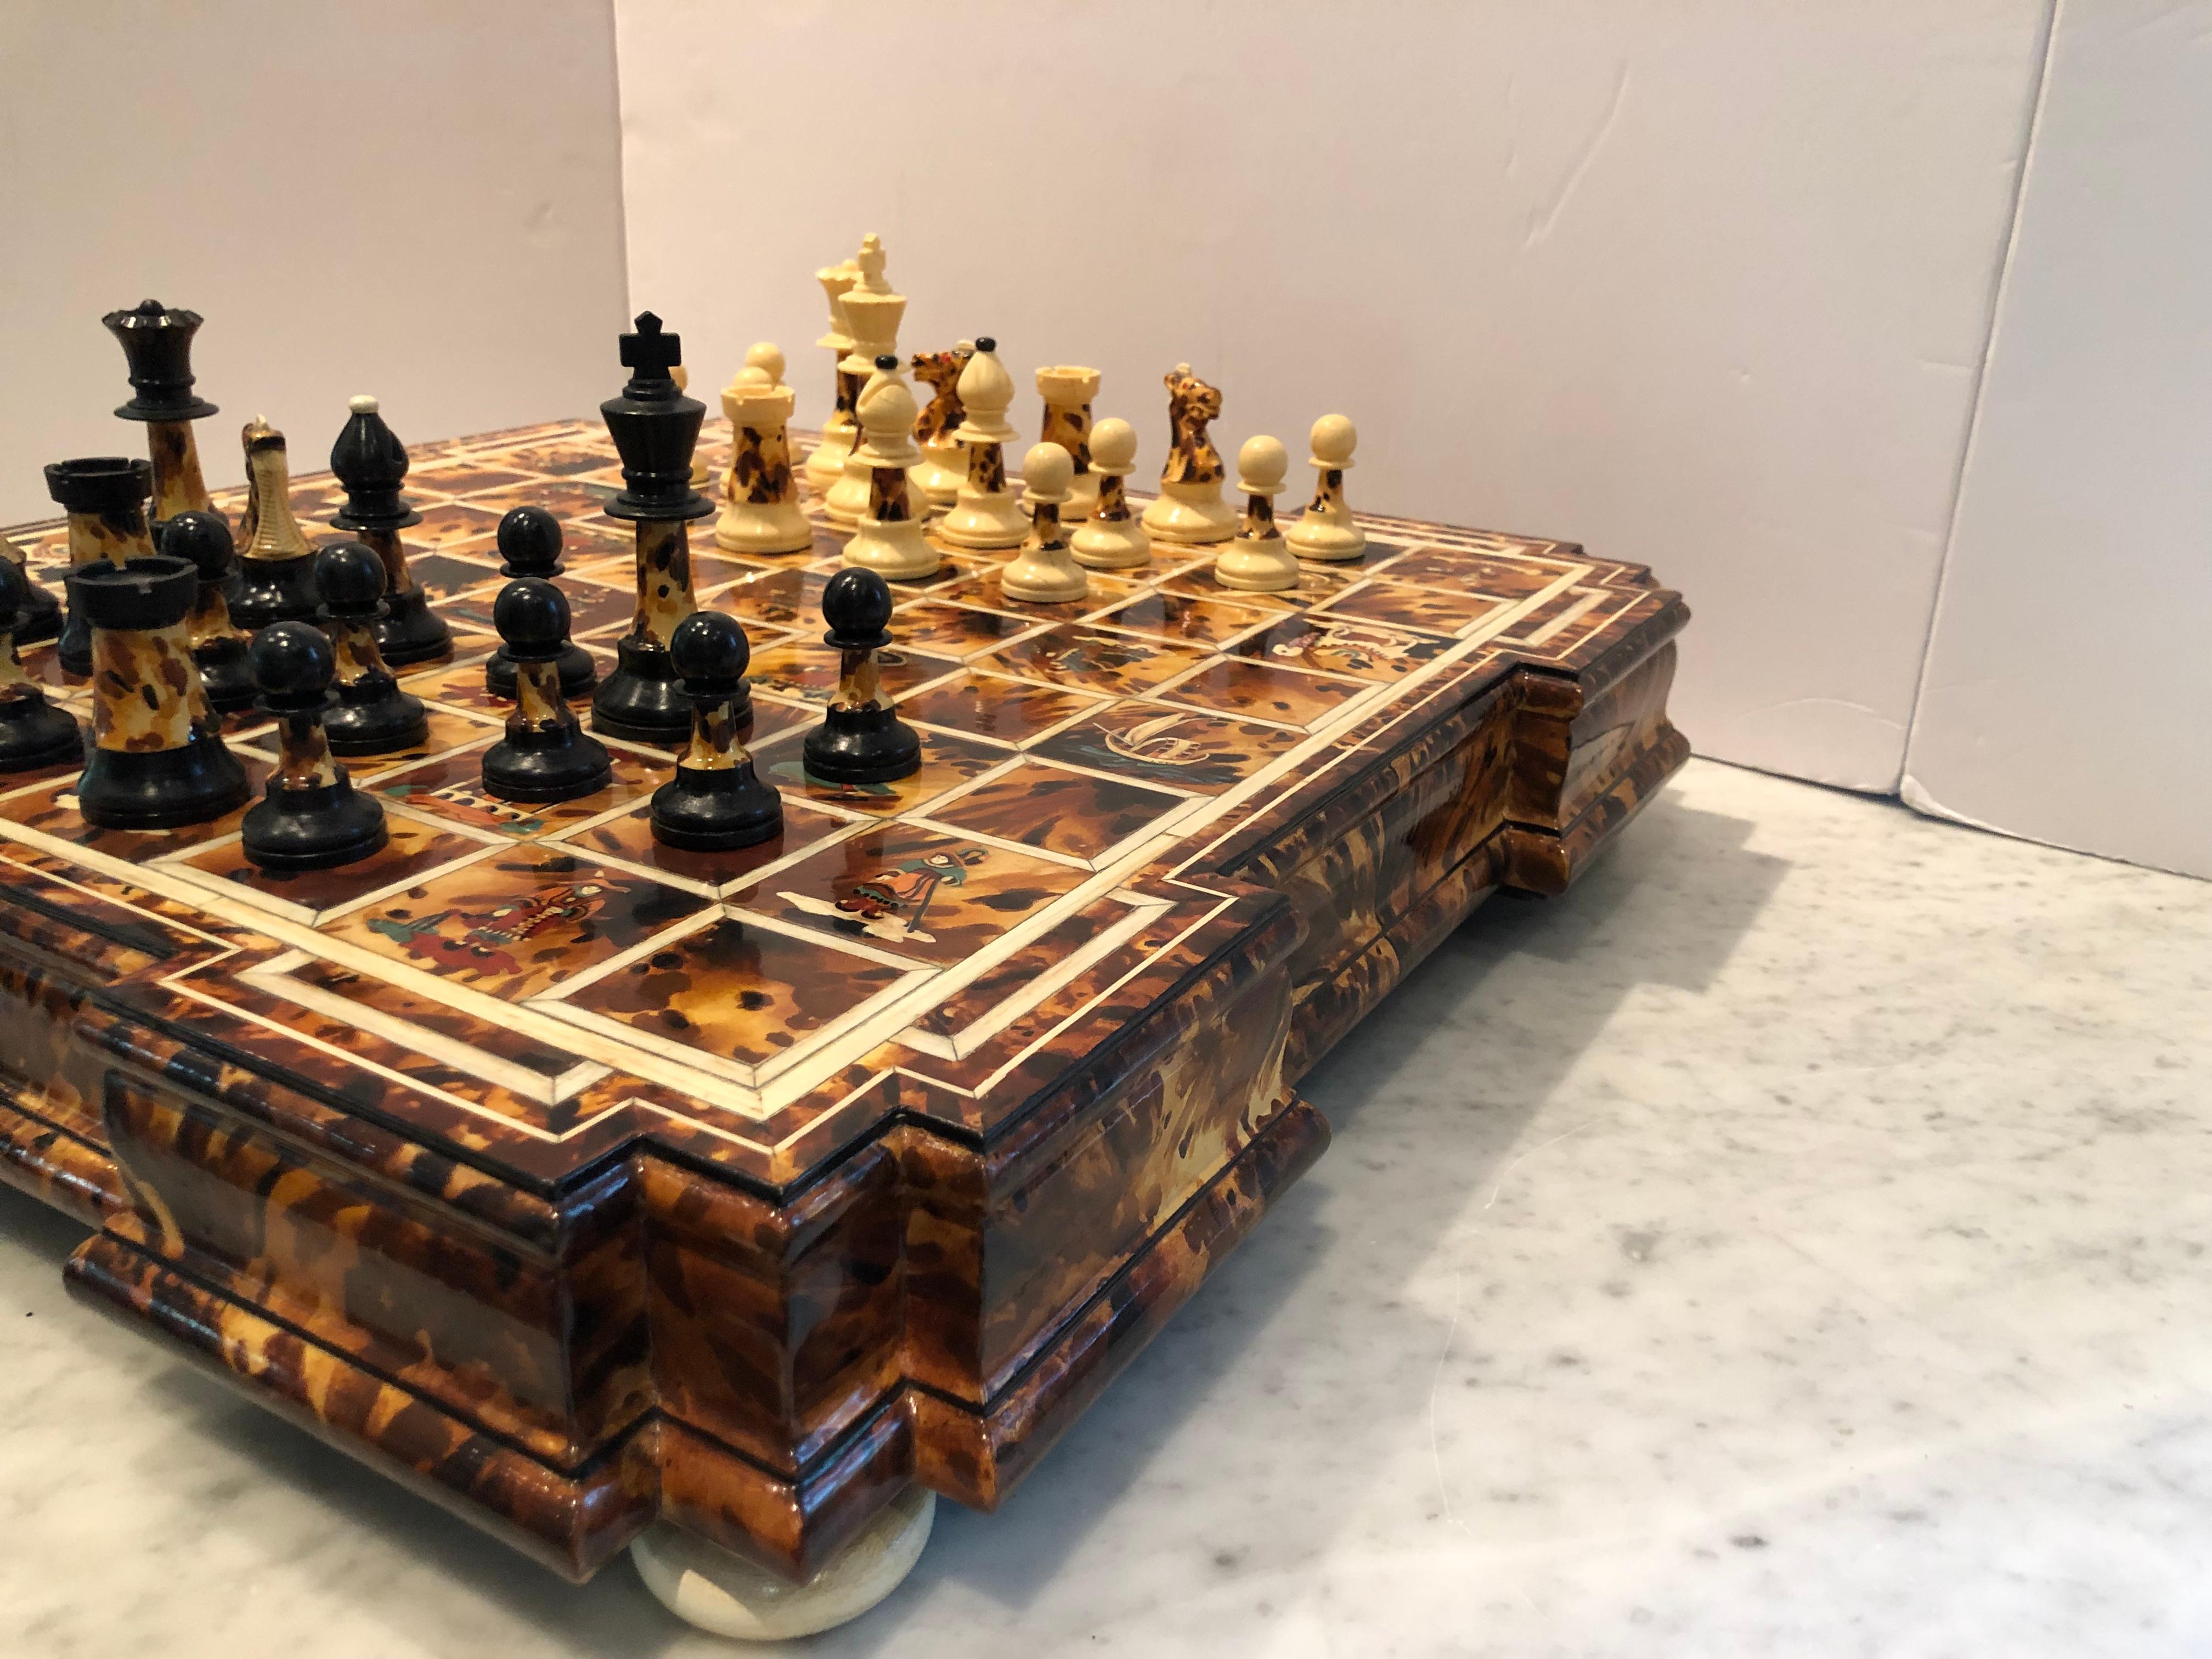 Stunning chess set in faux tortoise shell and inlay. The board has Asian figures and scenes painted throughout in beautiful detail. Lacquered finish. Each chess piece is also painted in a faux tortoise finish.